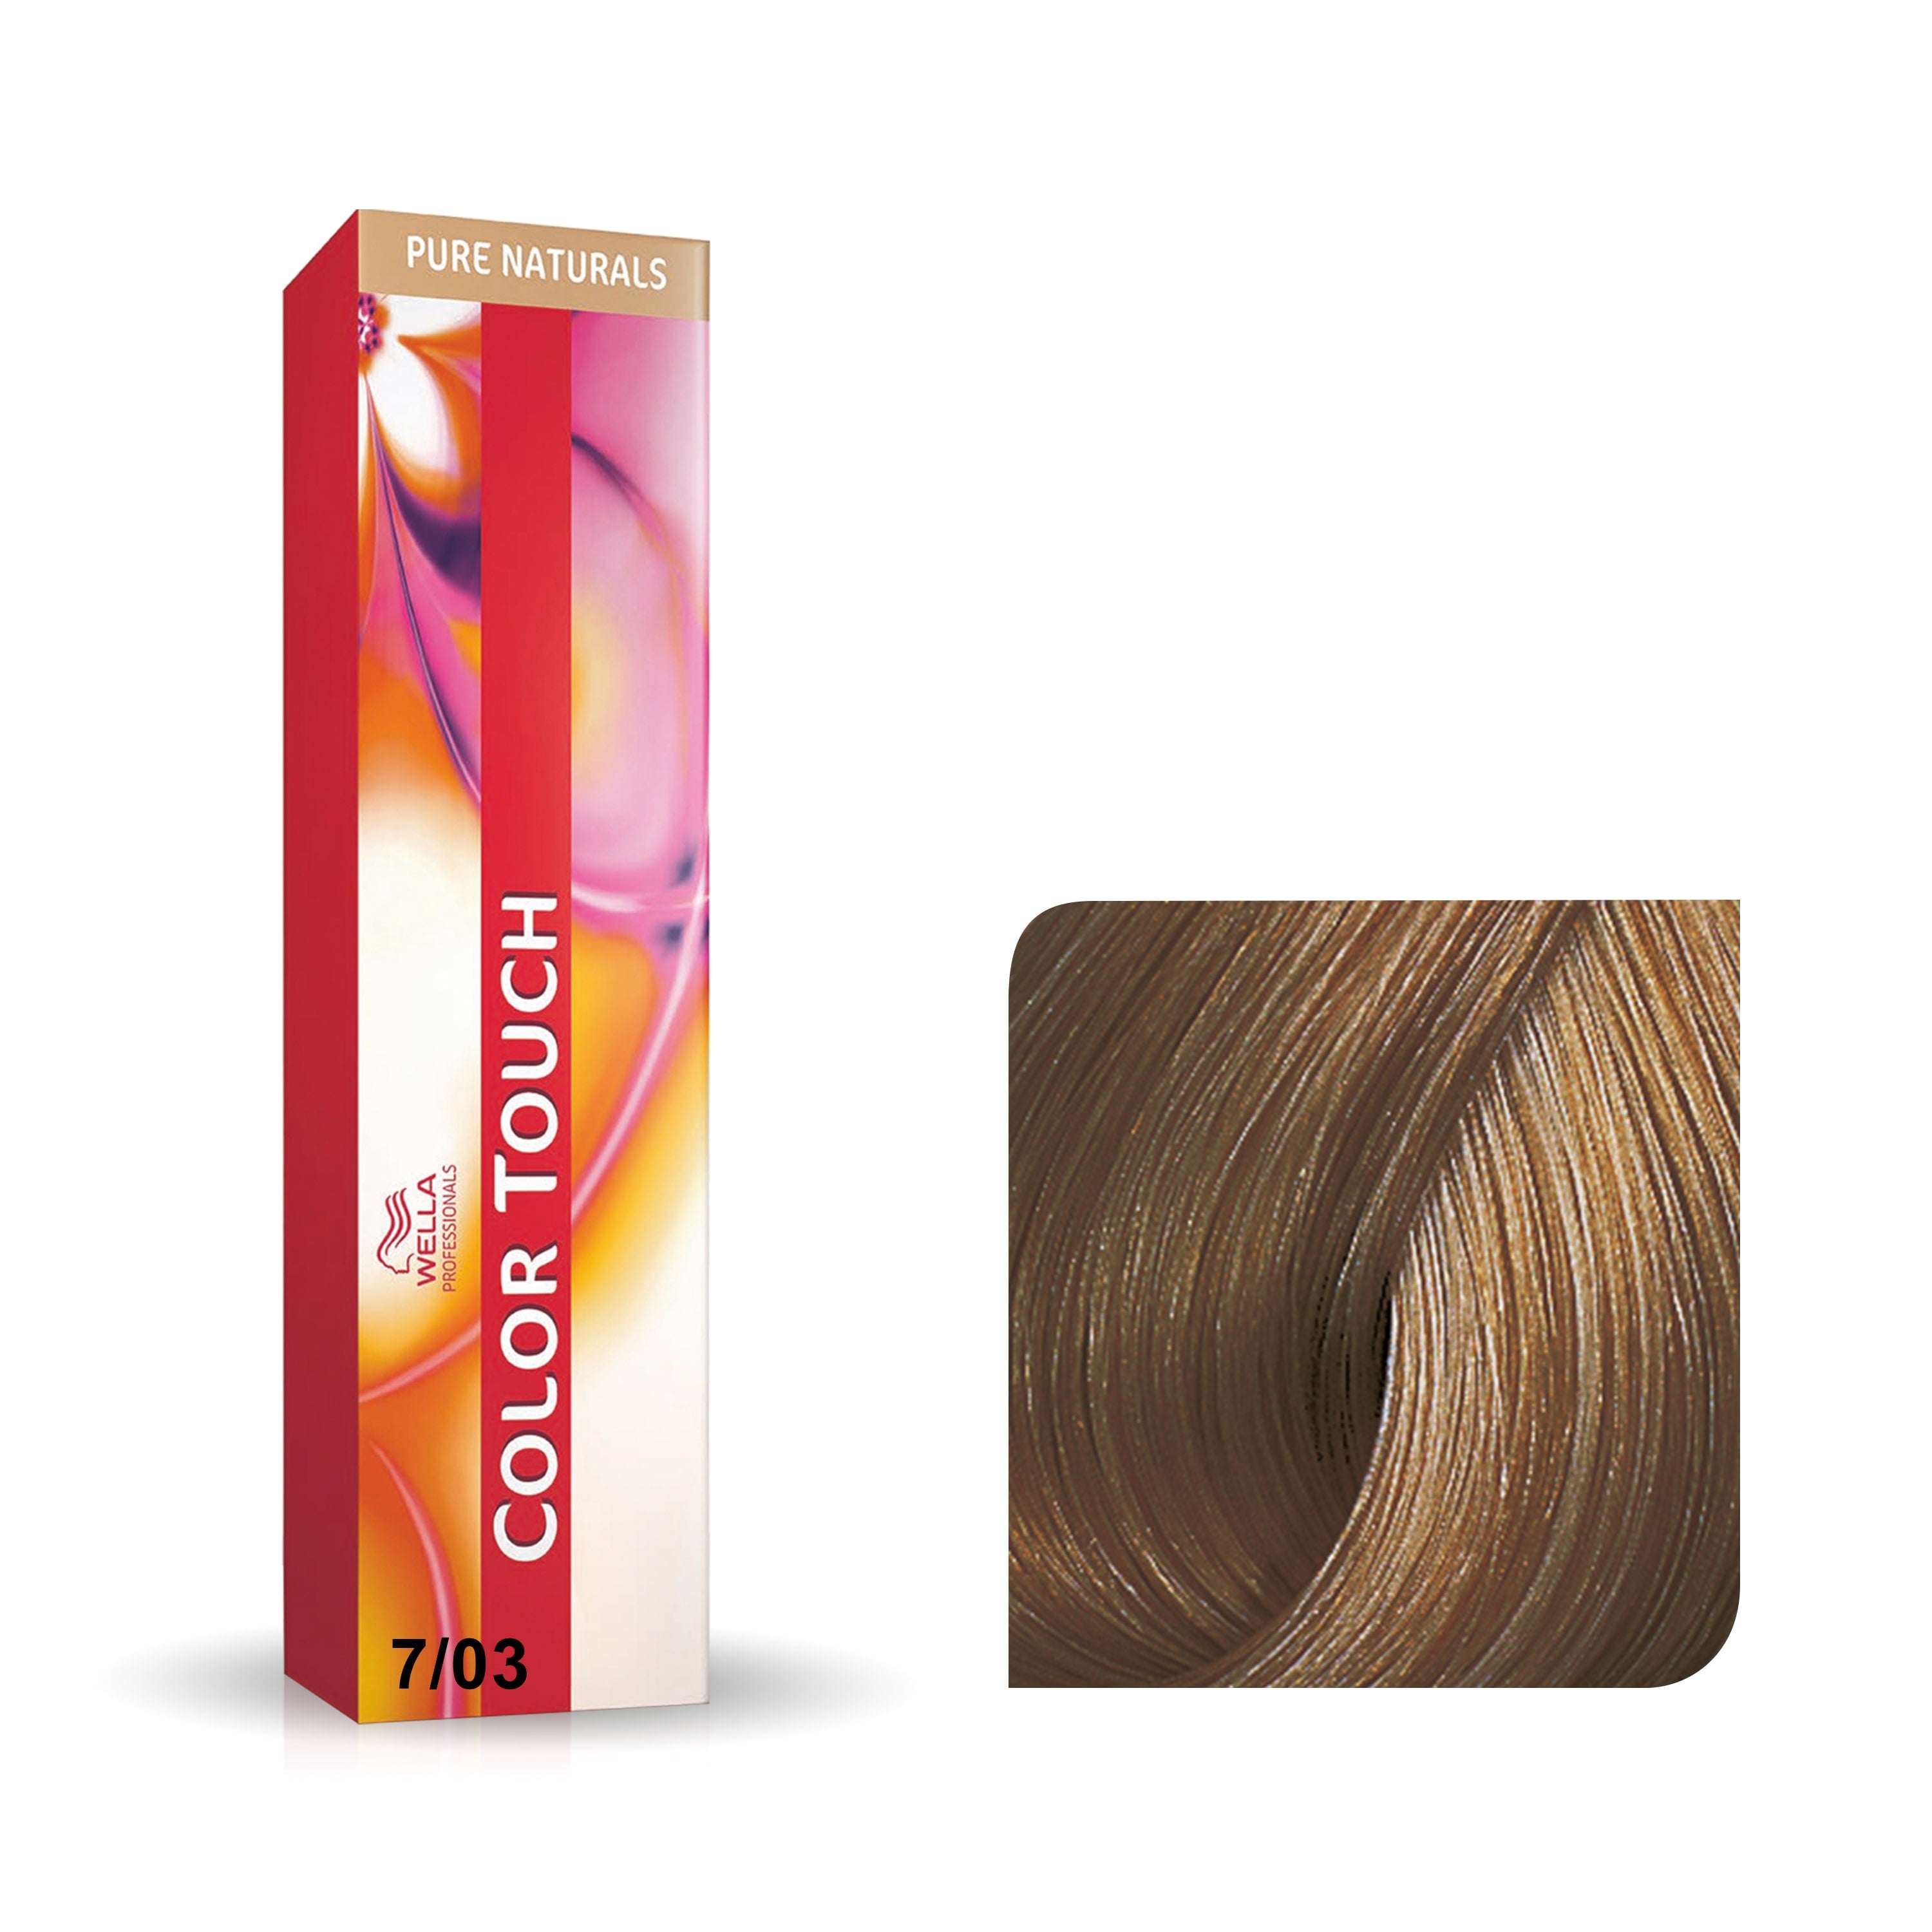 a box of hair color on a white background